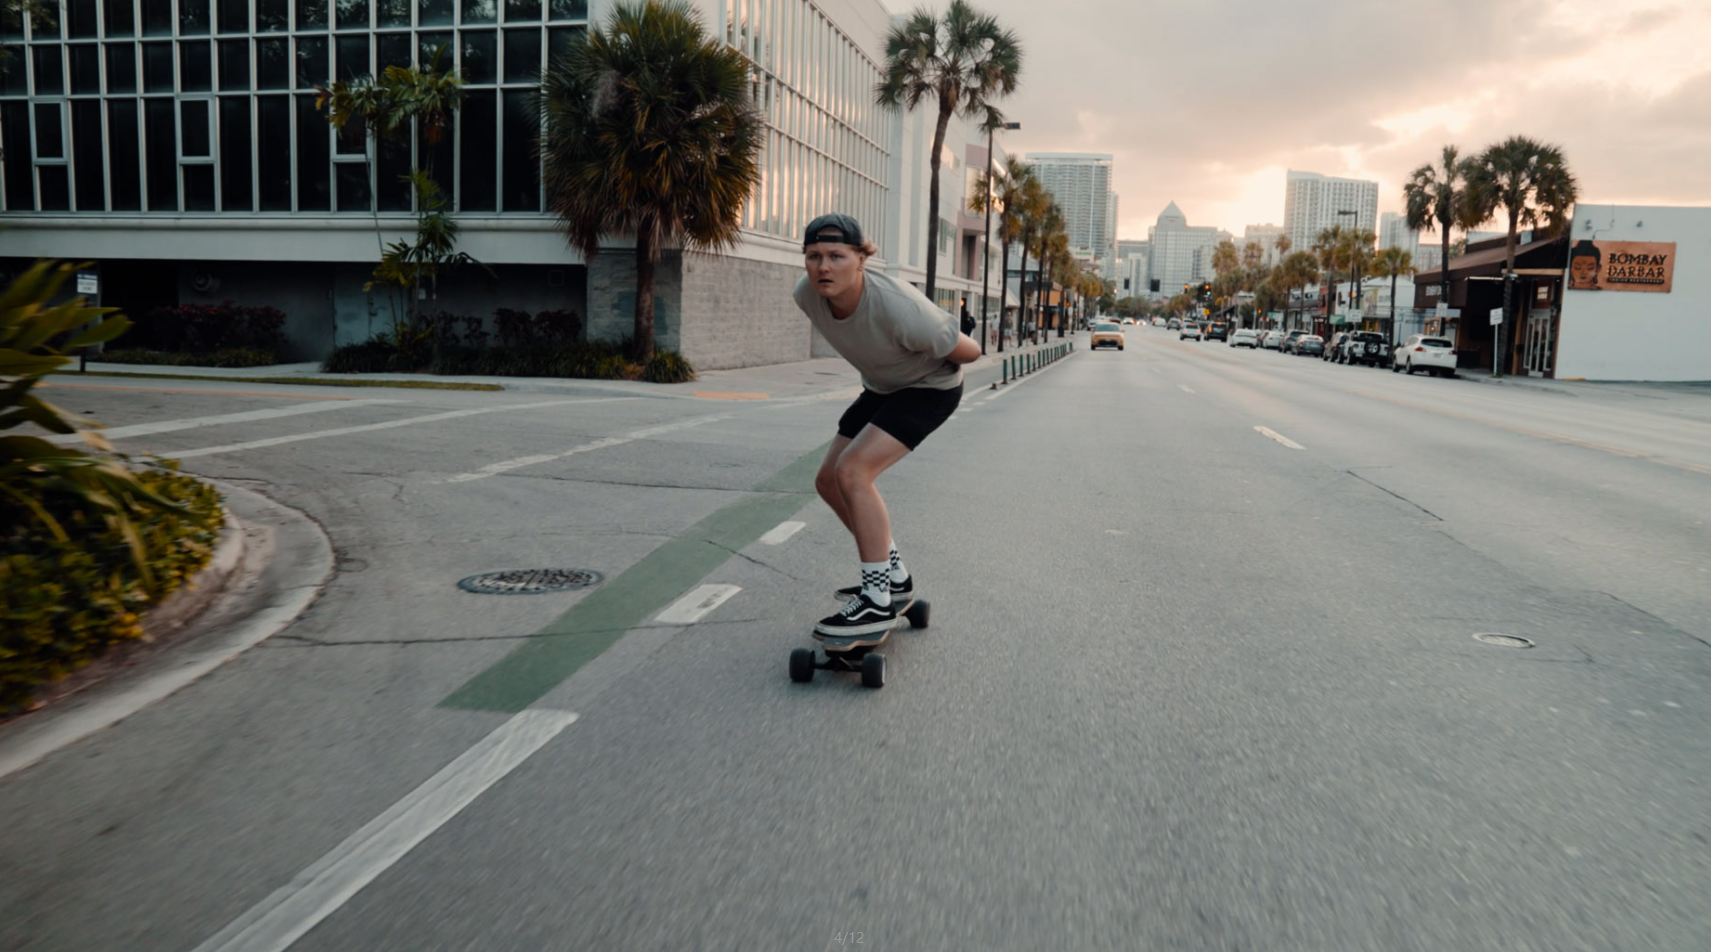 TOP 10 TIPS — How to ride an electric skateboard safely